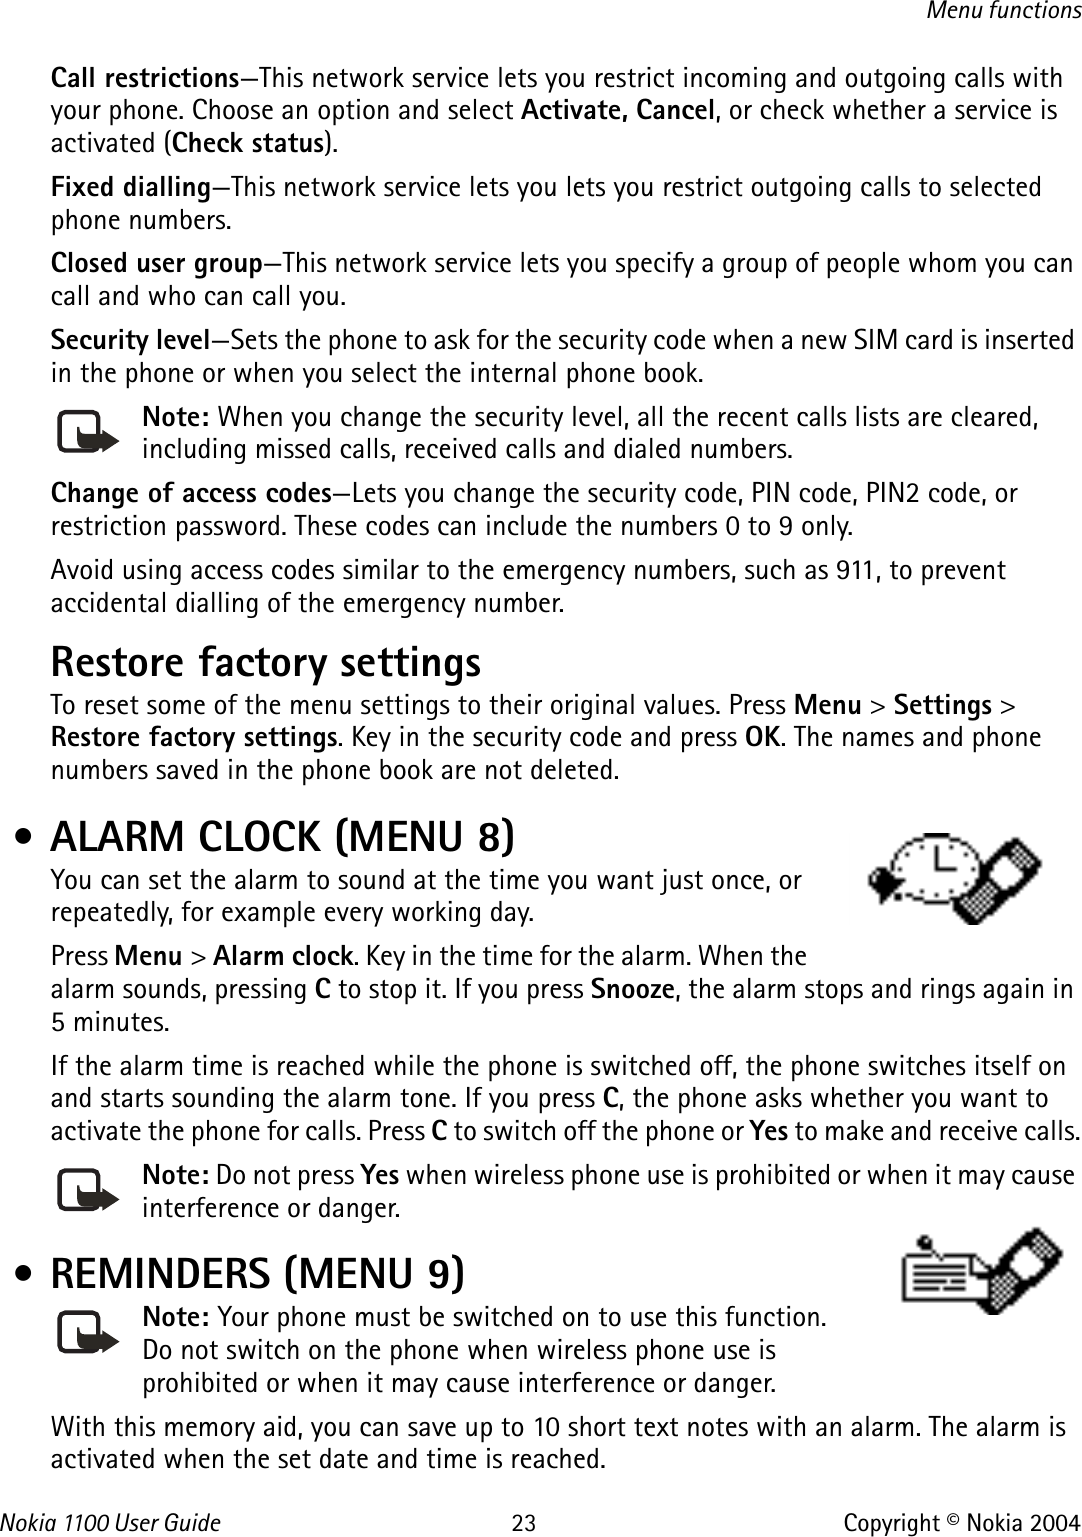 Nokia 110 0  User Guide 23 Copyright © Nokia 2004Menu functionsCall restrictions—This network service lets you restrict incoming and outgoing calls with your phone. Choose an option and select Activate, Cancel, or check whether a service is activated (Check status).Fixed dialling—This network service lets you lets you restrict outgoing calls to selected phone numbers.Closed user group—This network service lets you specify a group of people whom you can call and who can call you.Security level—Sets the phone to ask for the security code when a new SIM card is inserted in the phone or when you select the internal phone book.Note: When you change the security level, all the recent calls lists are cleared, including missed calls, received calls and dialed numbers.Change of access codes—Lets you change the security code, PIN code, PIN2 code, or restriction password. These codes can include the numbers 0 to 9 only.Avoid using access codes similar to the emergency numbers, such as 911, to prevent accidental dialling of the emergency number.Restore factory settings To reset some of the menu settings to their original values. Press Menu &gt; Settings &gt; Restore factory settings. Key in the security code and press OK. The names and phone numbers saved in the phone book are not deleted. • ALARM CLOCK (MENU 8)You can set the alarm to sound at the time you want just once, or repeatedly, for example every working day. Press Menu &gt; Alarm clock. Key in the time for the alarm. When the alarm sounds, pressing C to stop it. If you press Snooze, the alarm stops and rings again in 5 minutes.If the alarm time is reached while the phone is switched off, the phone switches itself on and starts sounding the alarm tone. If you press C, the phone asks whether you want to activate the phone for calls. Press C to switch off the phone or Yes to make and receive calls.Note: Do not press Yes when wireless phone use is prohibited or when it may cause interference or danger. • REMINDERS (MENU 9)Note: Your phone must be switched on to use this function. Do not switch on the phone when wireless phone use is prohibited or when it may cause interference or danger.With this memory aid, you can save up to 10 short text notes with an alarm. The alarm is activated when the set date and time is reached.